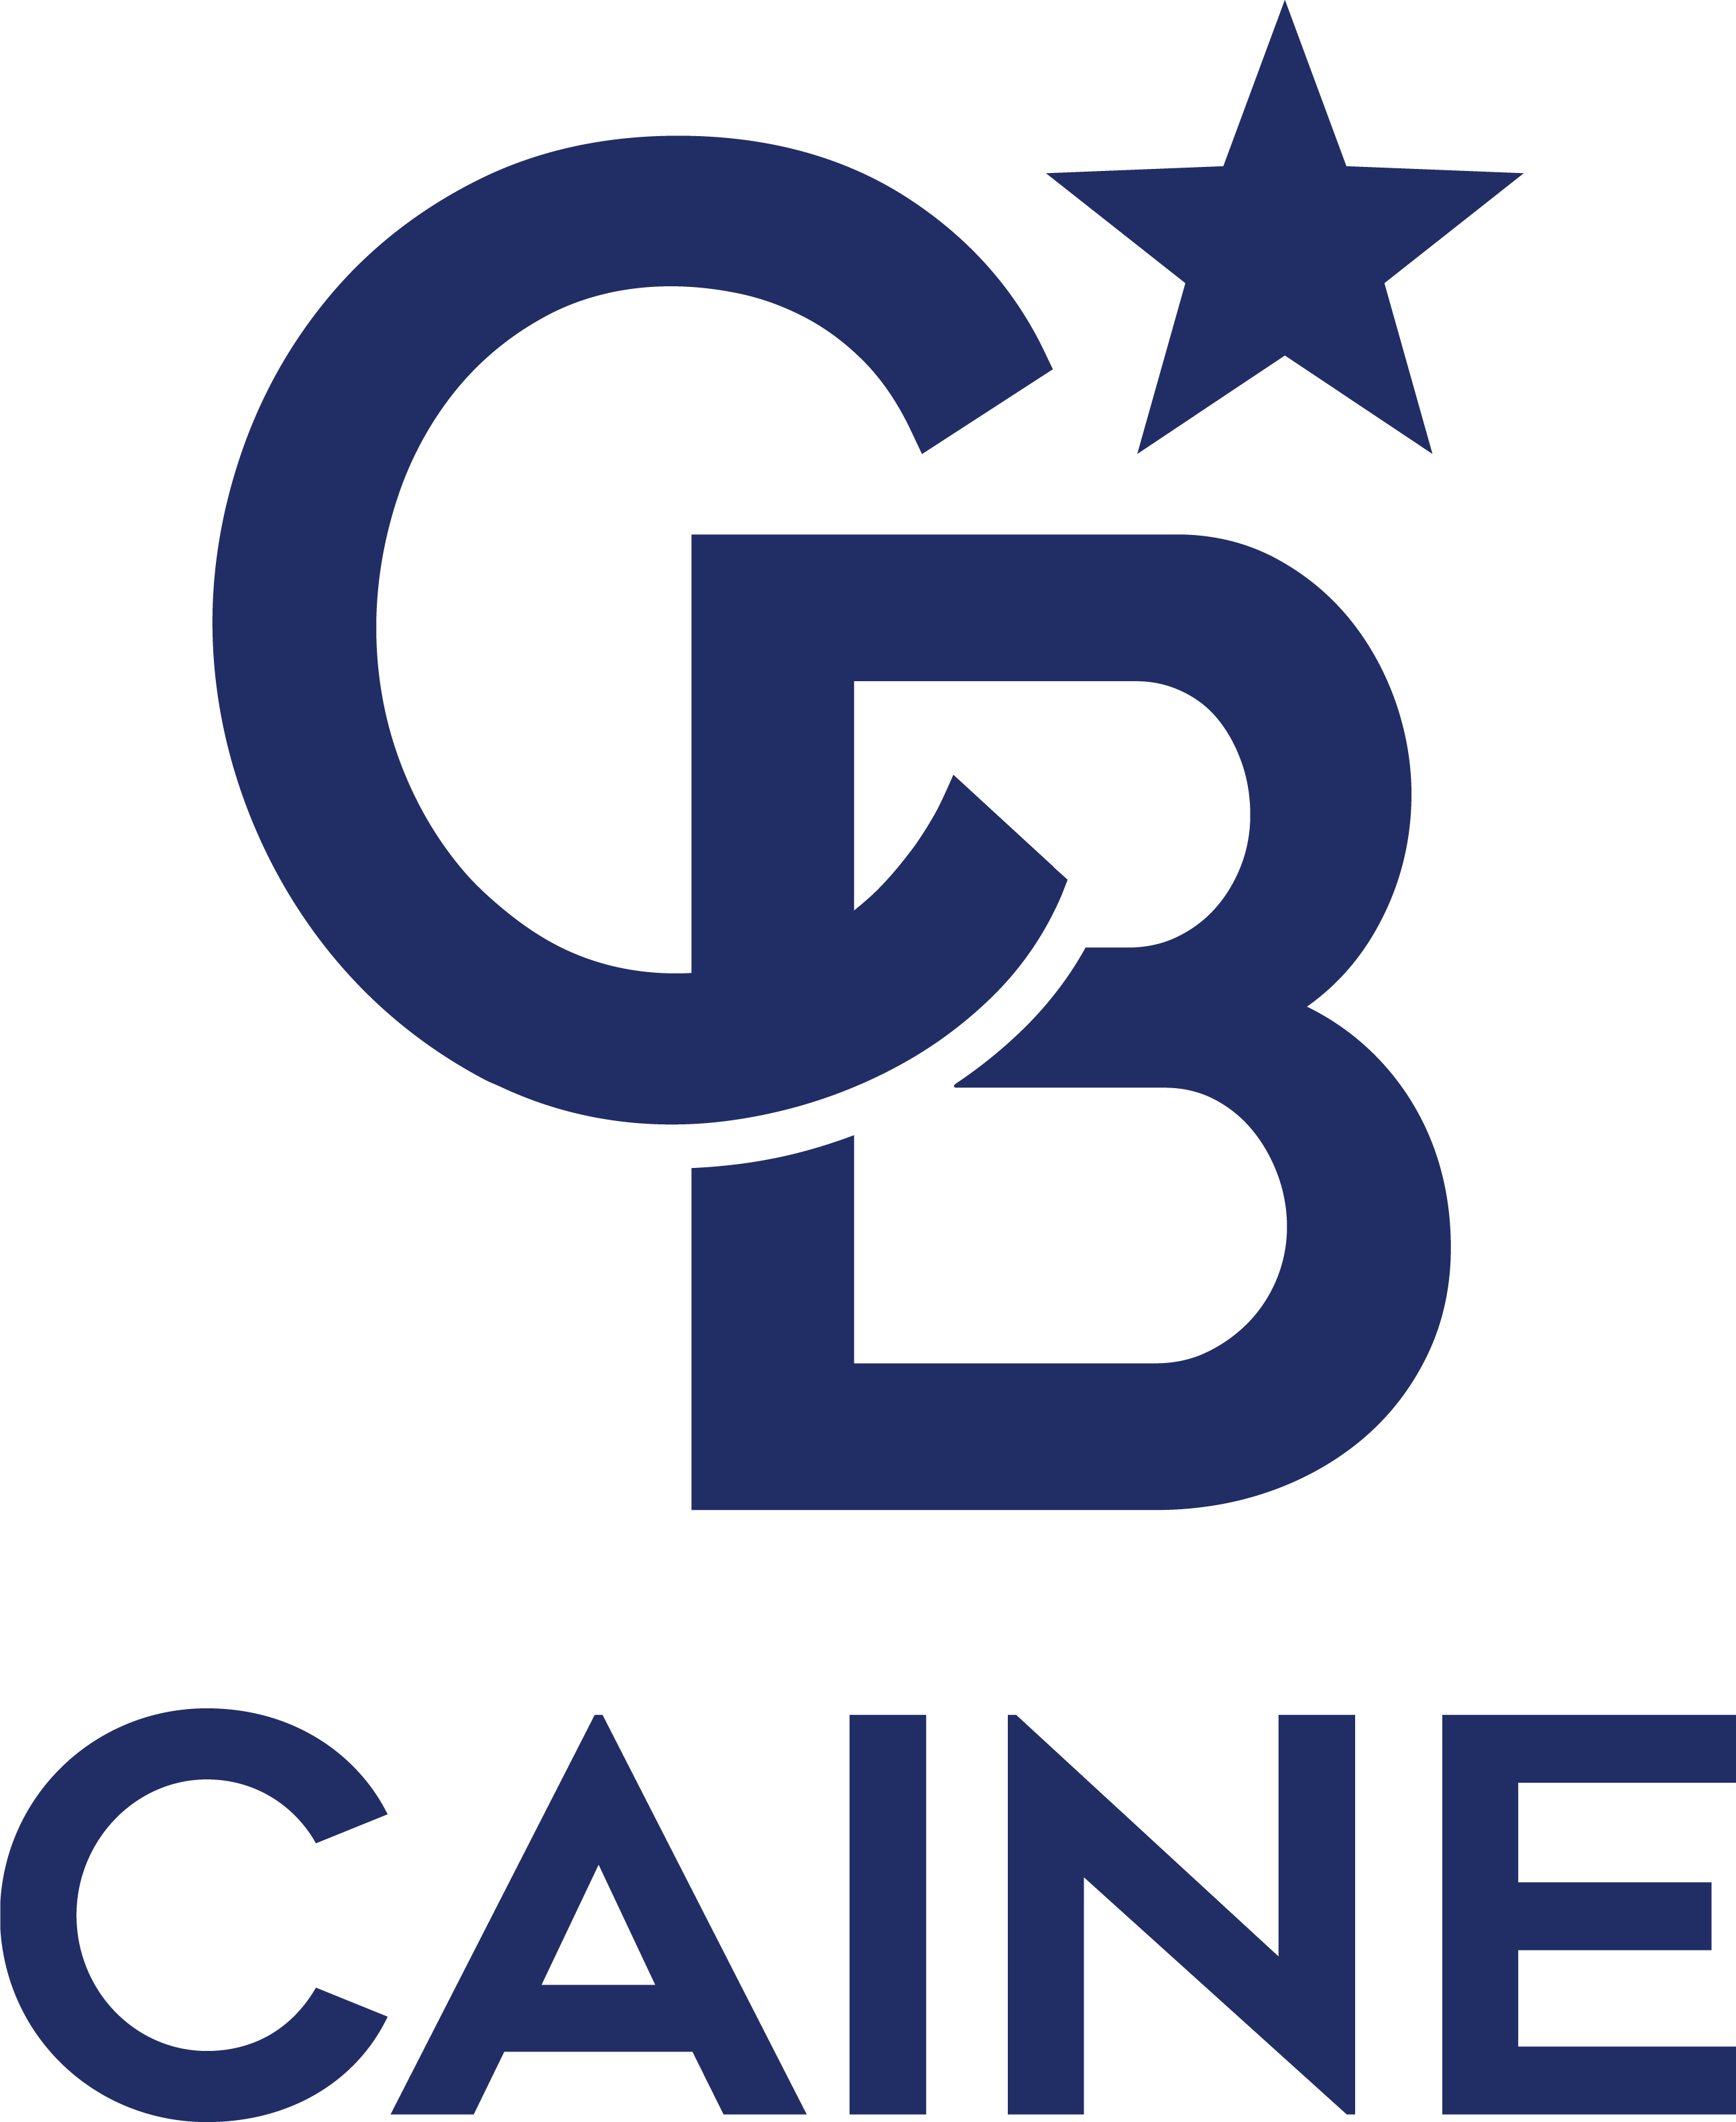 Coldwell Banker Caine logo